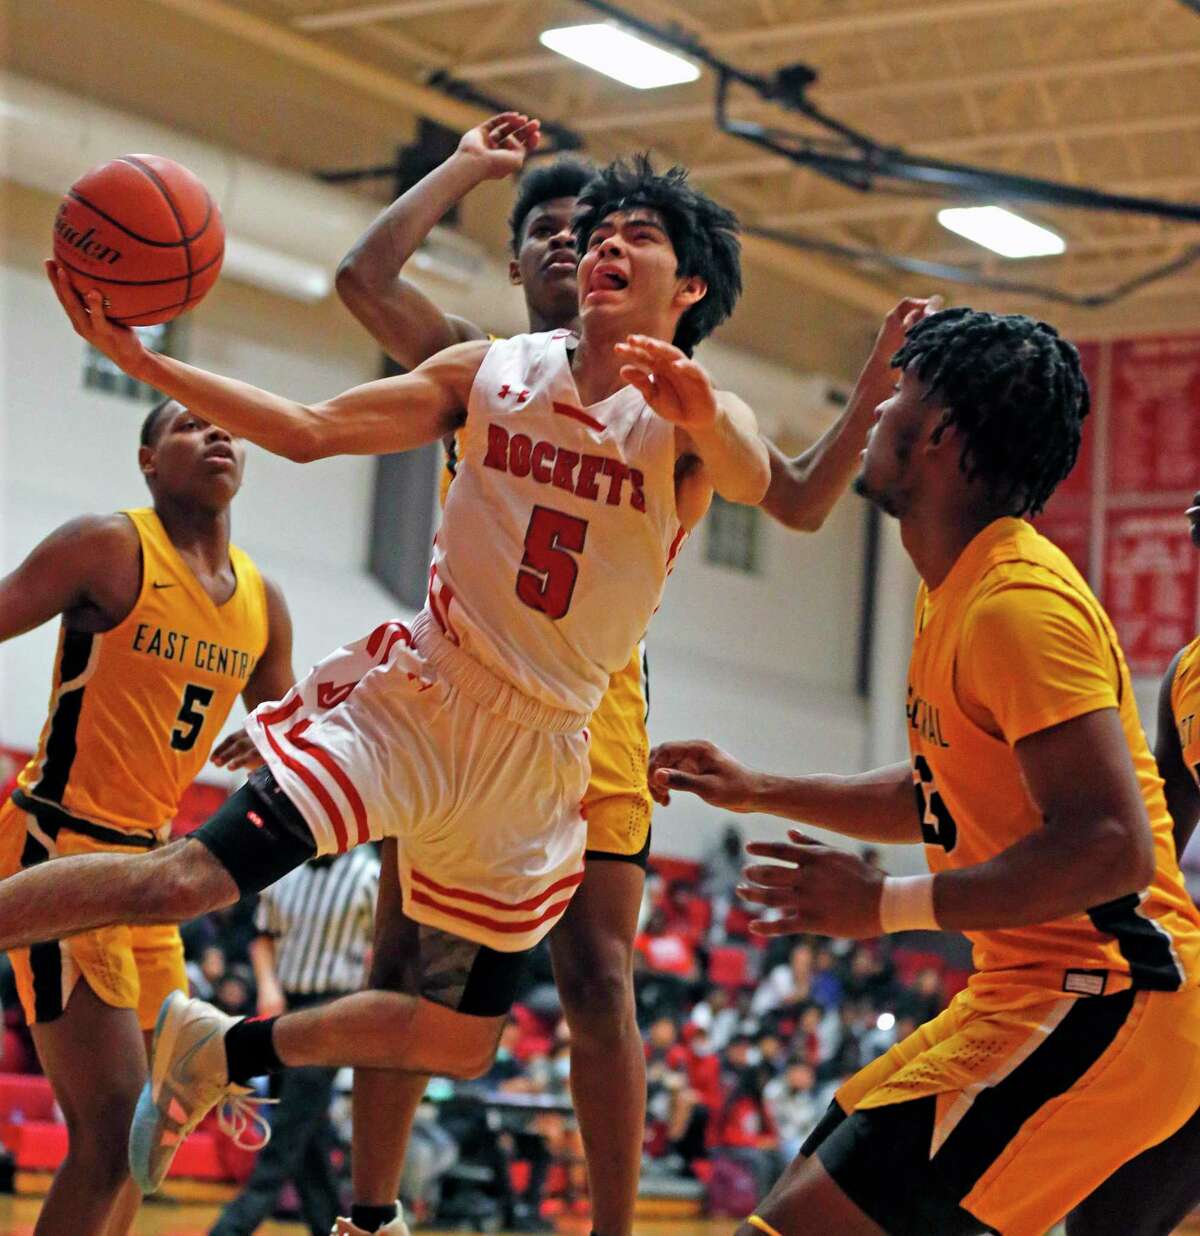 Judson guard Donovan Gomez #5 drives against East Central defenders in first half. East Central defeated Judson 67-65 on Tuesday, Jan. 11, 2022 at Judson HS.